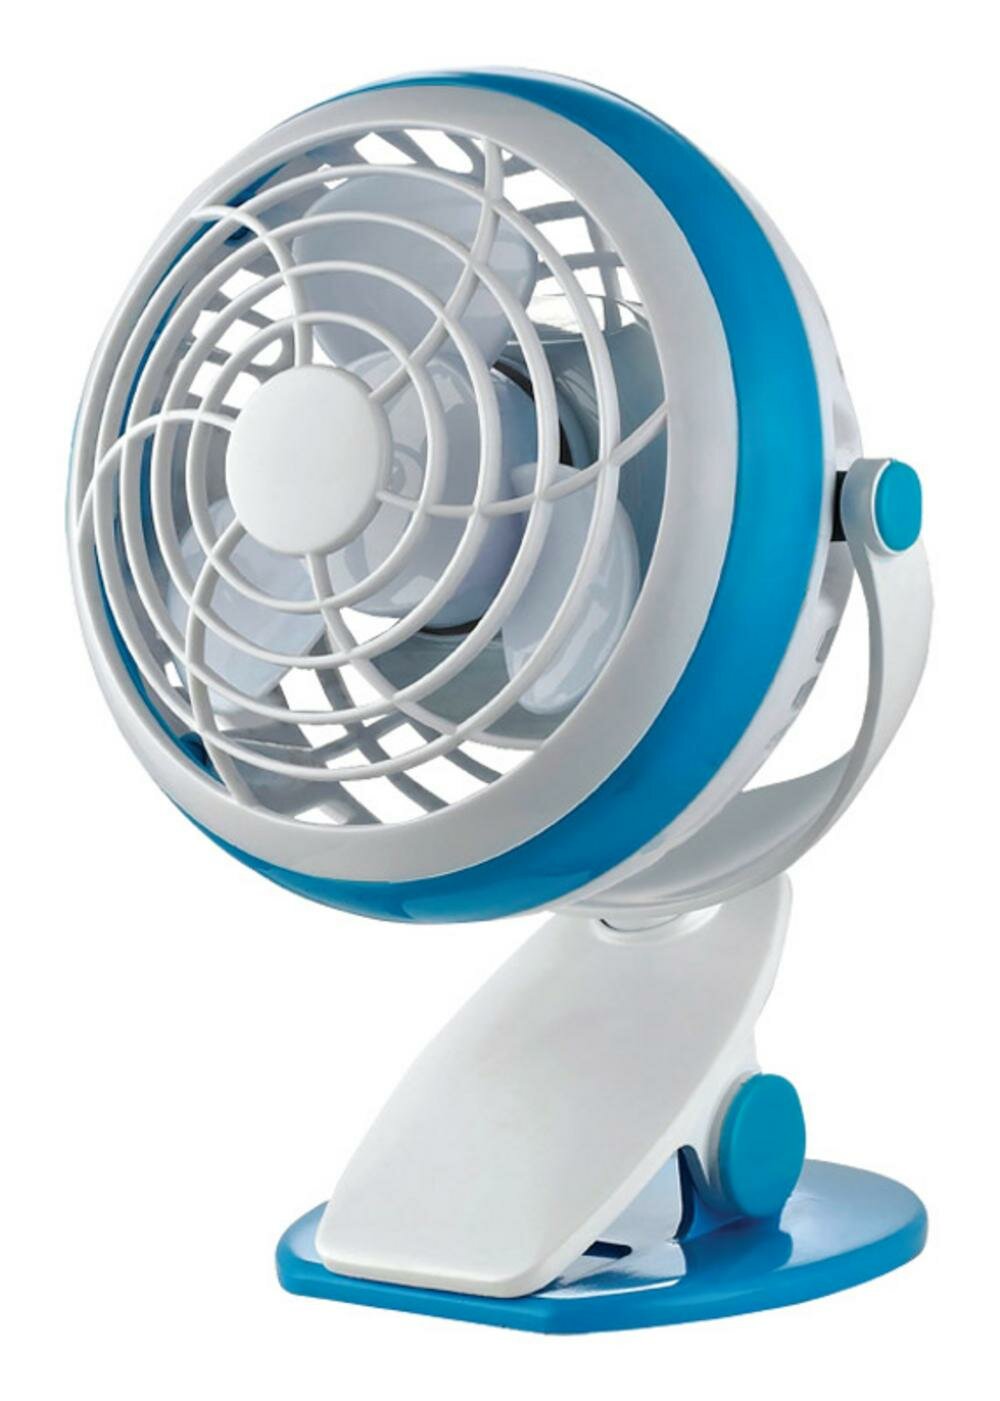 AA Battery Operated or USB Powered 3 Speed Oscillating USB Desk Fan with Adjustable Head for Office and Home not Included